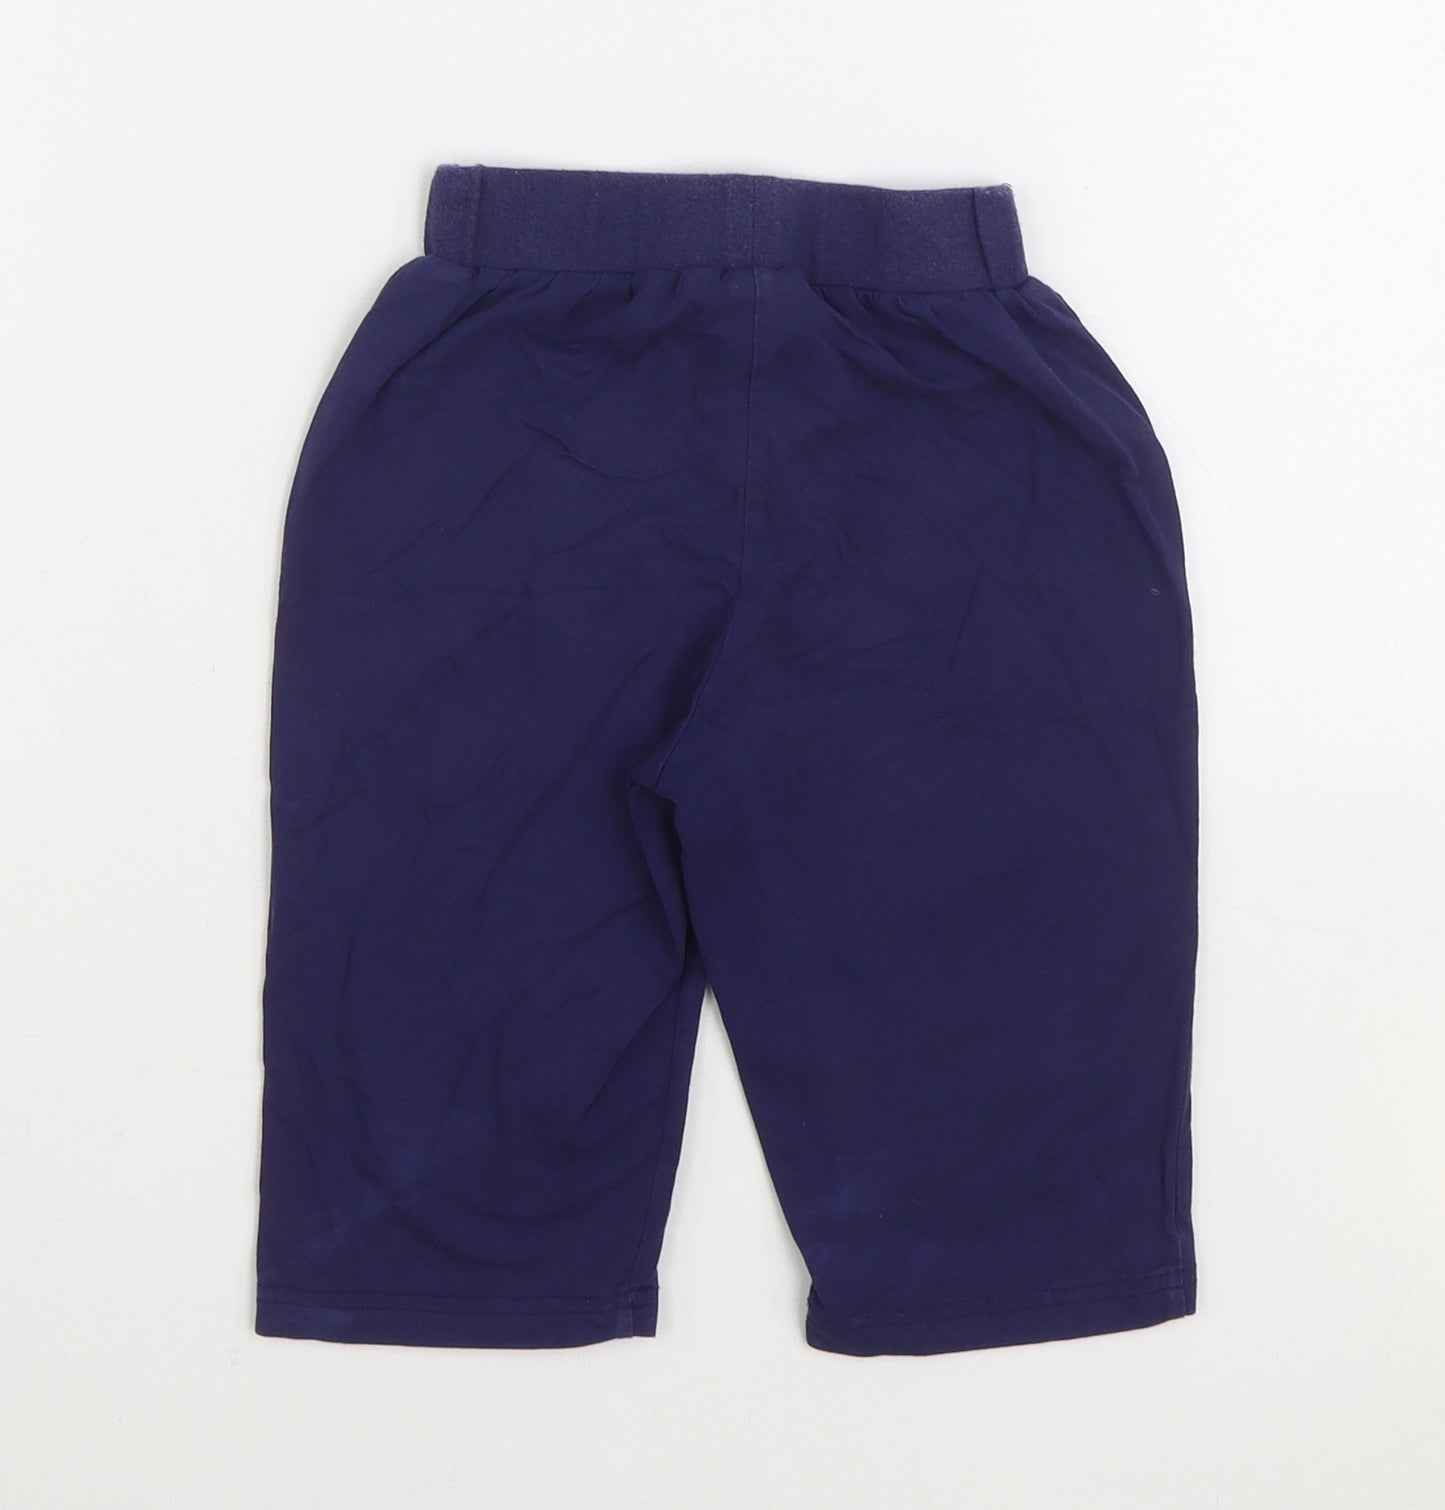 Ciboo Kids Boys Blue Cotton Jogger Trousers Size 4-5 Years Regular Pullover